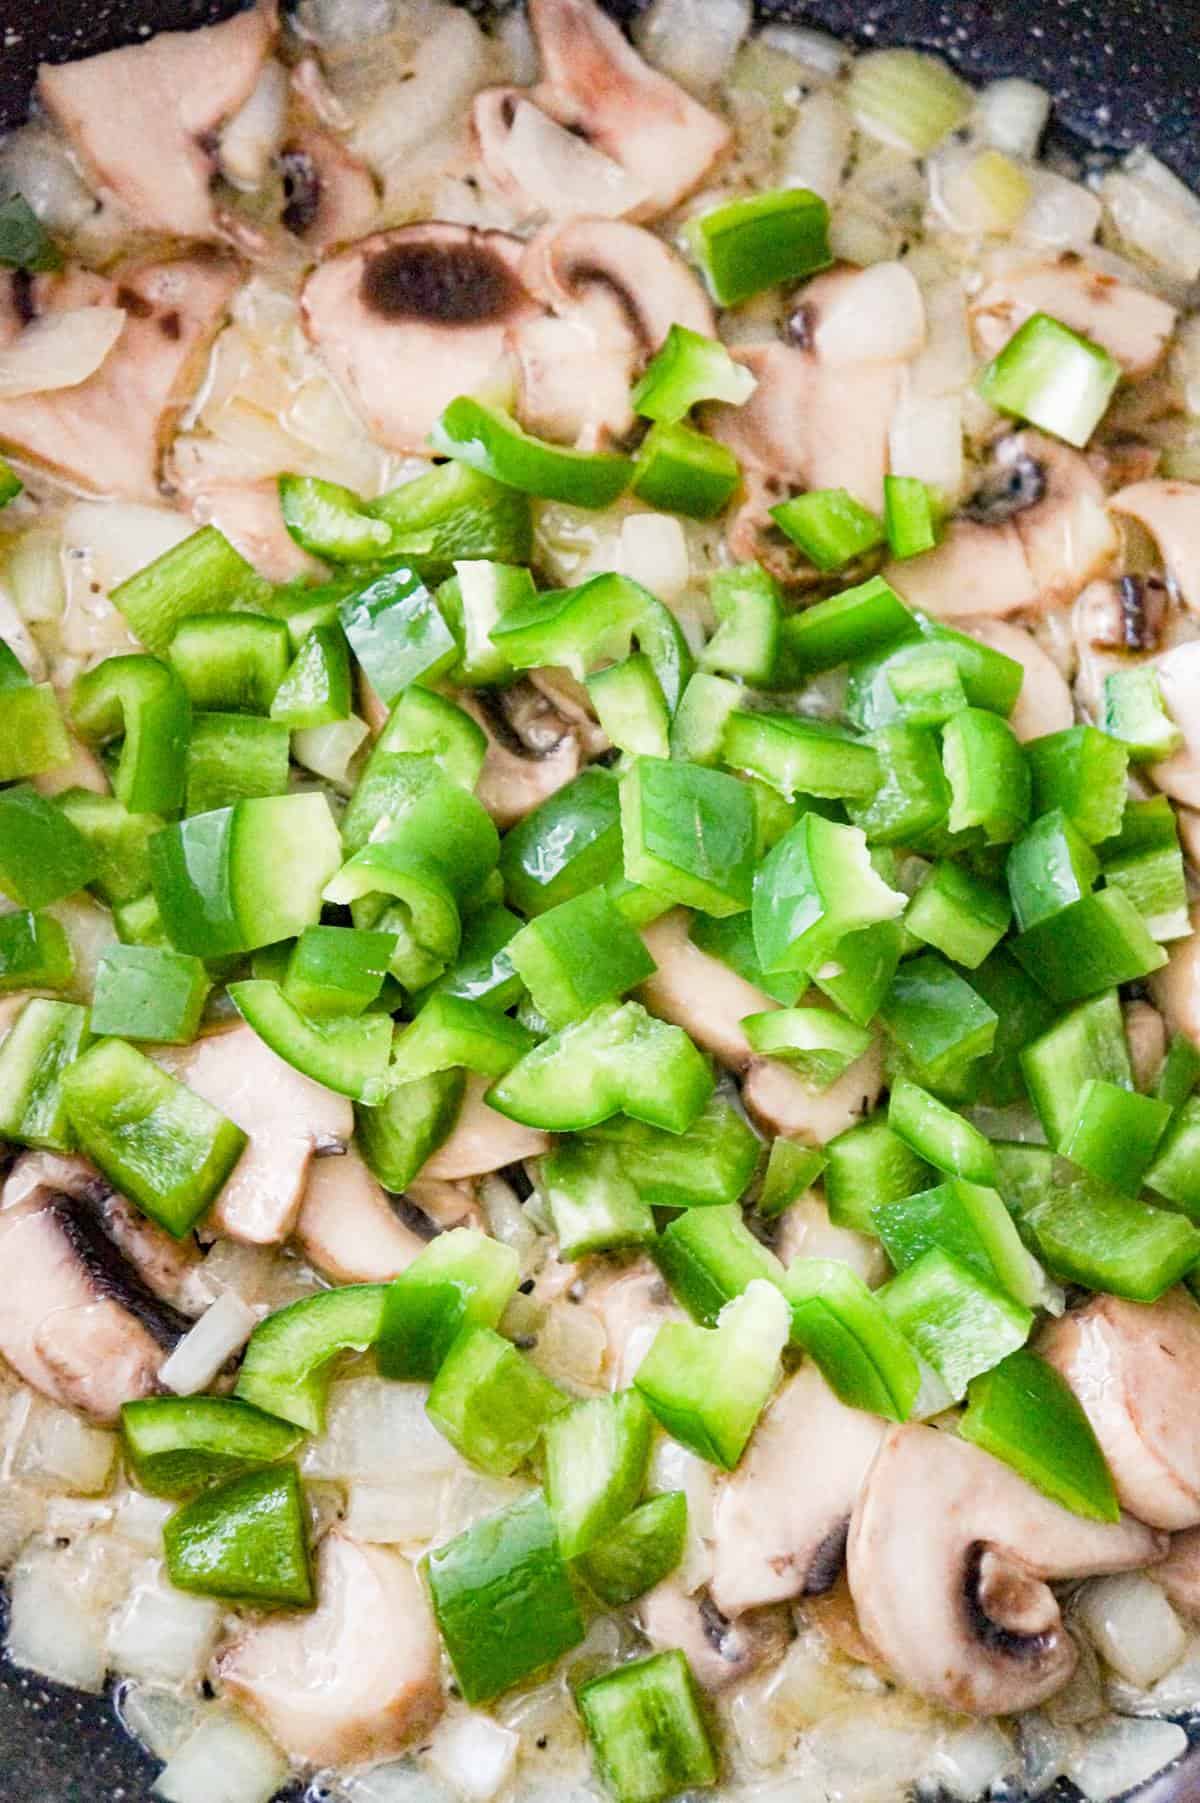 diced green peppers on top of sliced mushrooms and diced onions in a saute pan